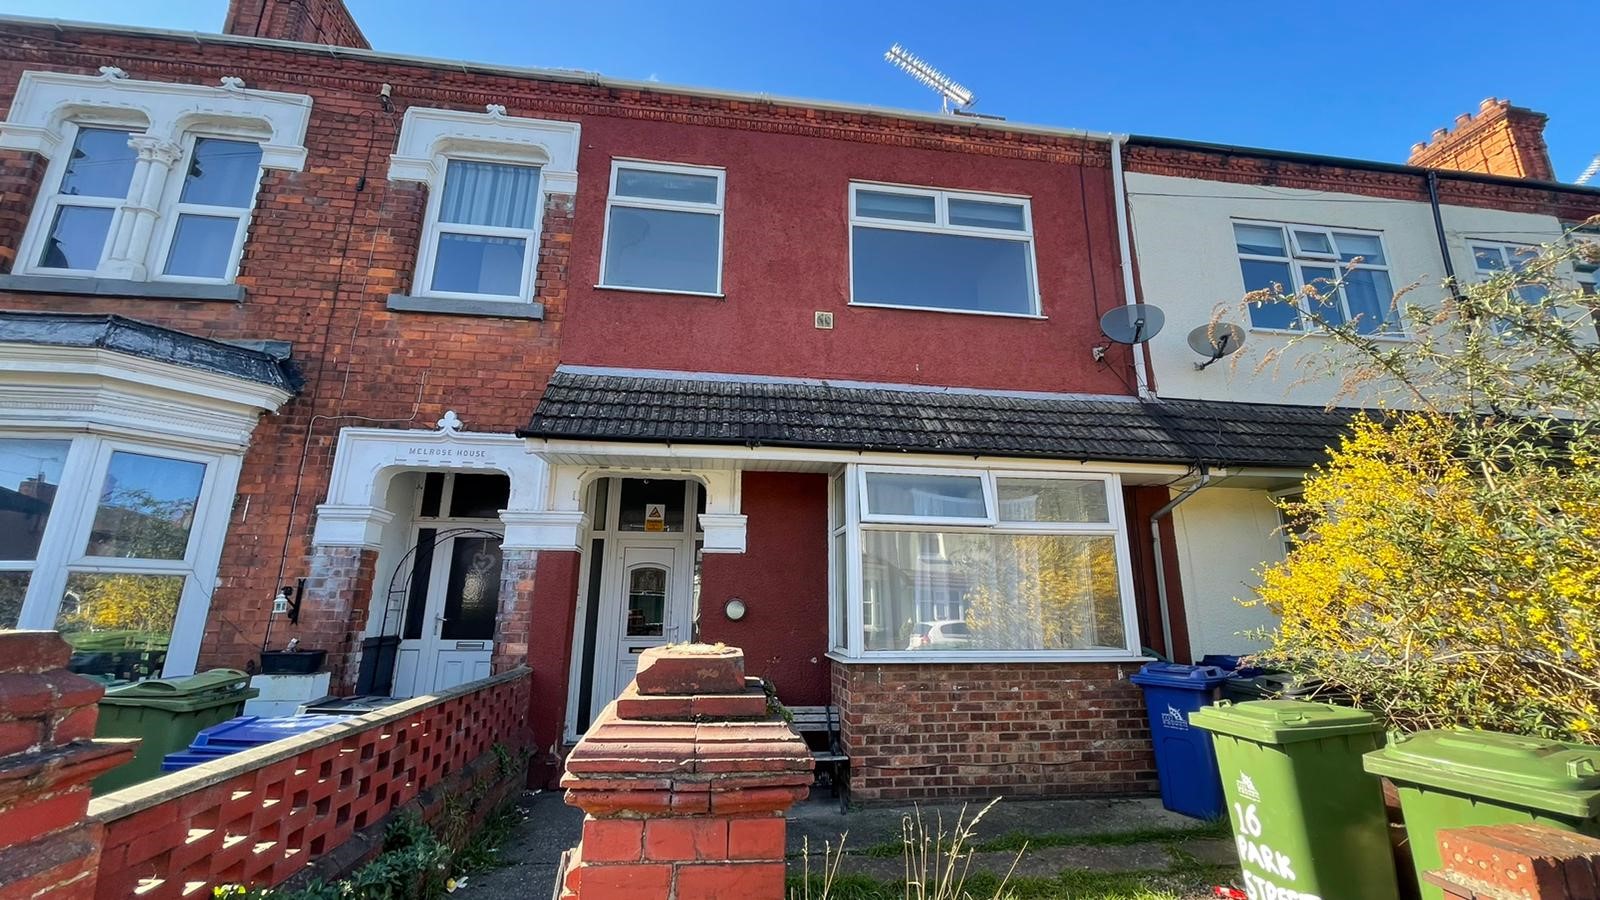 1 bed Mid Terraced House for rent in Grimsby. From Aston Estates - Cleethorpes